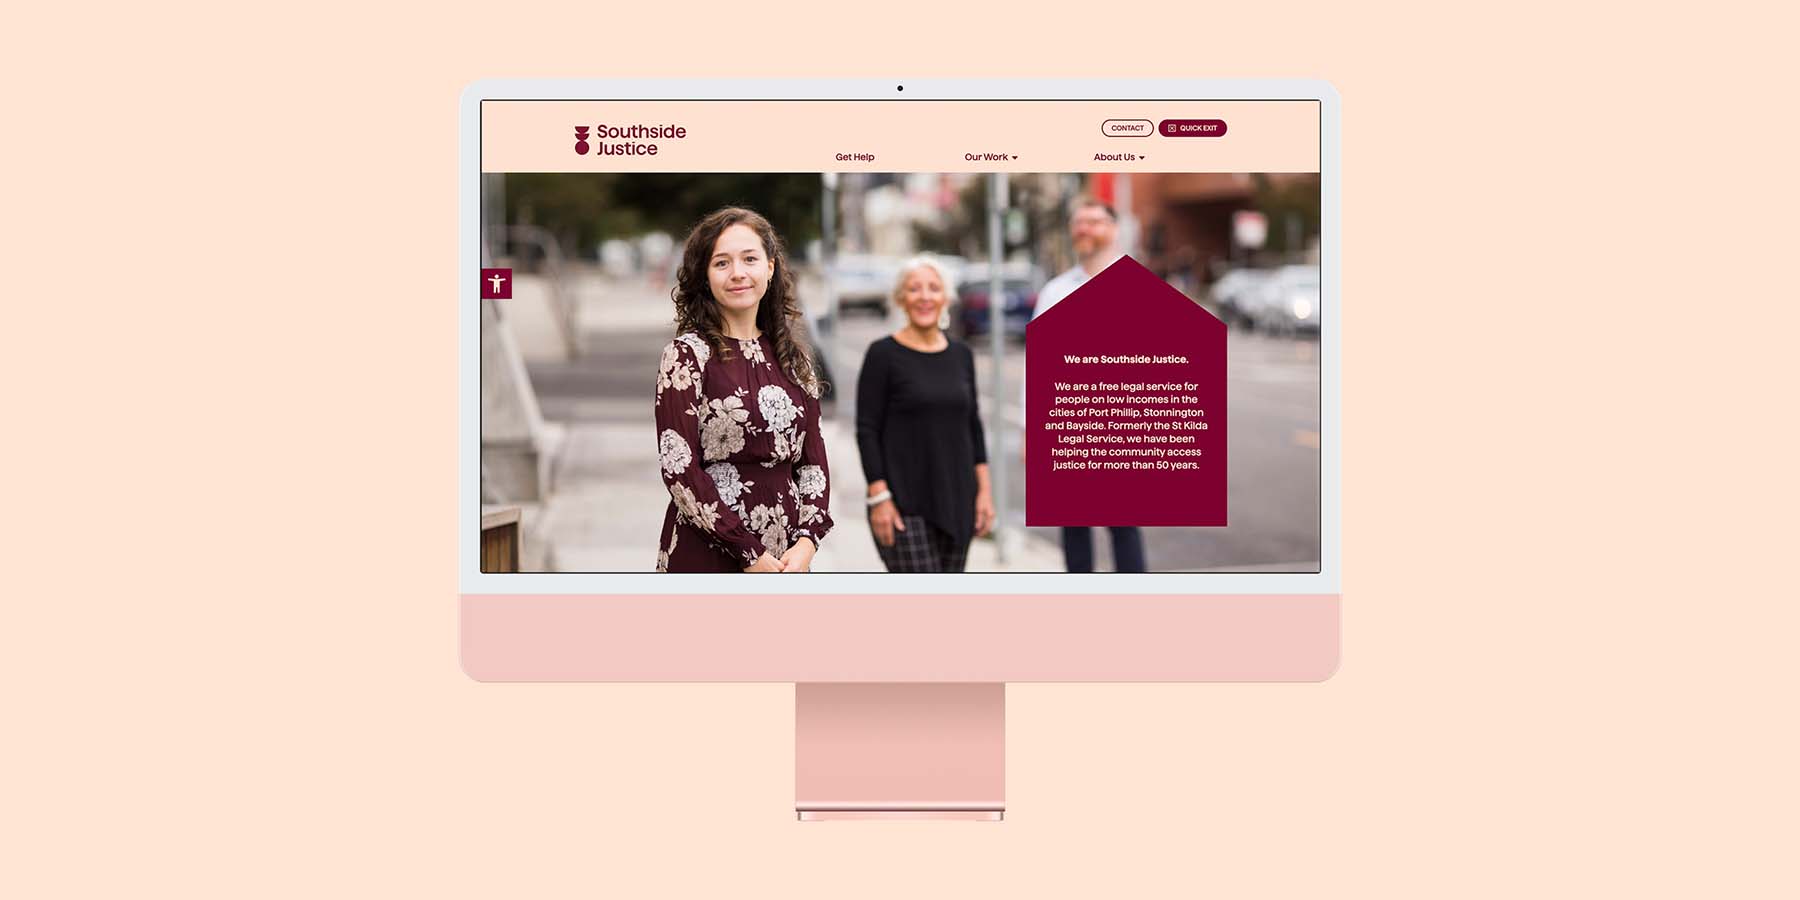 Southside Justice website home page with a hero photo of a female on a St Kilda street taken by Anna Carlile.